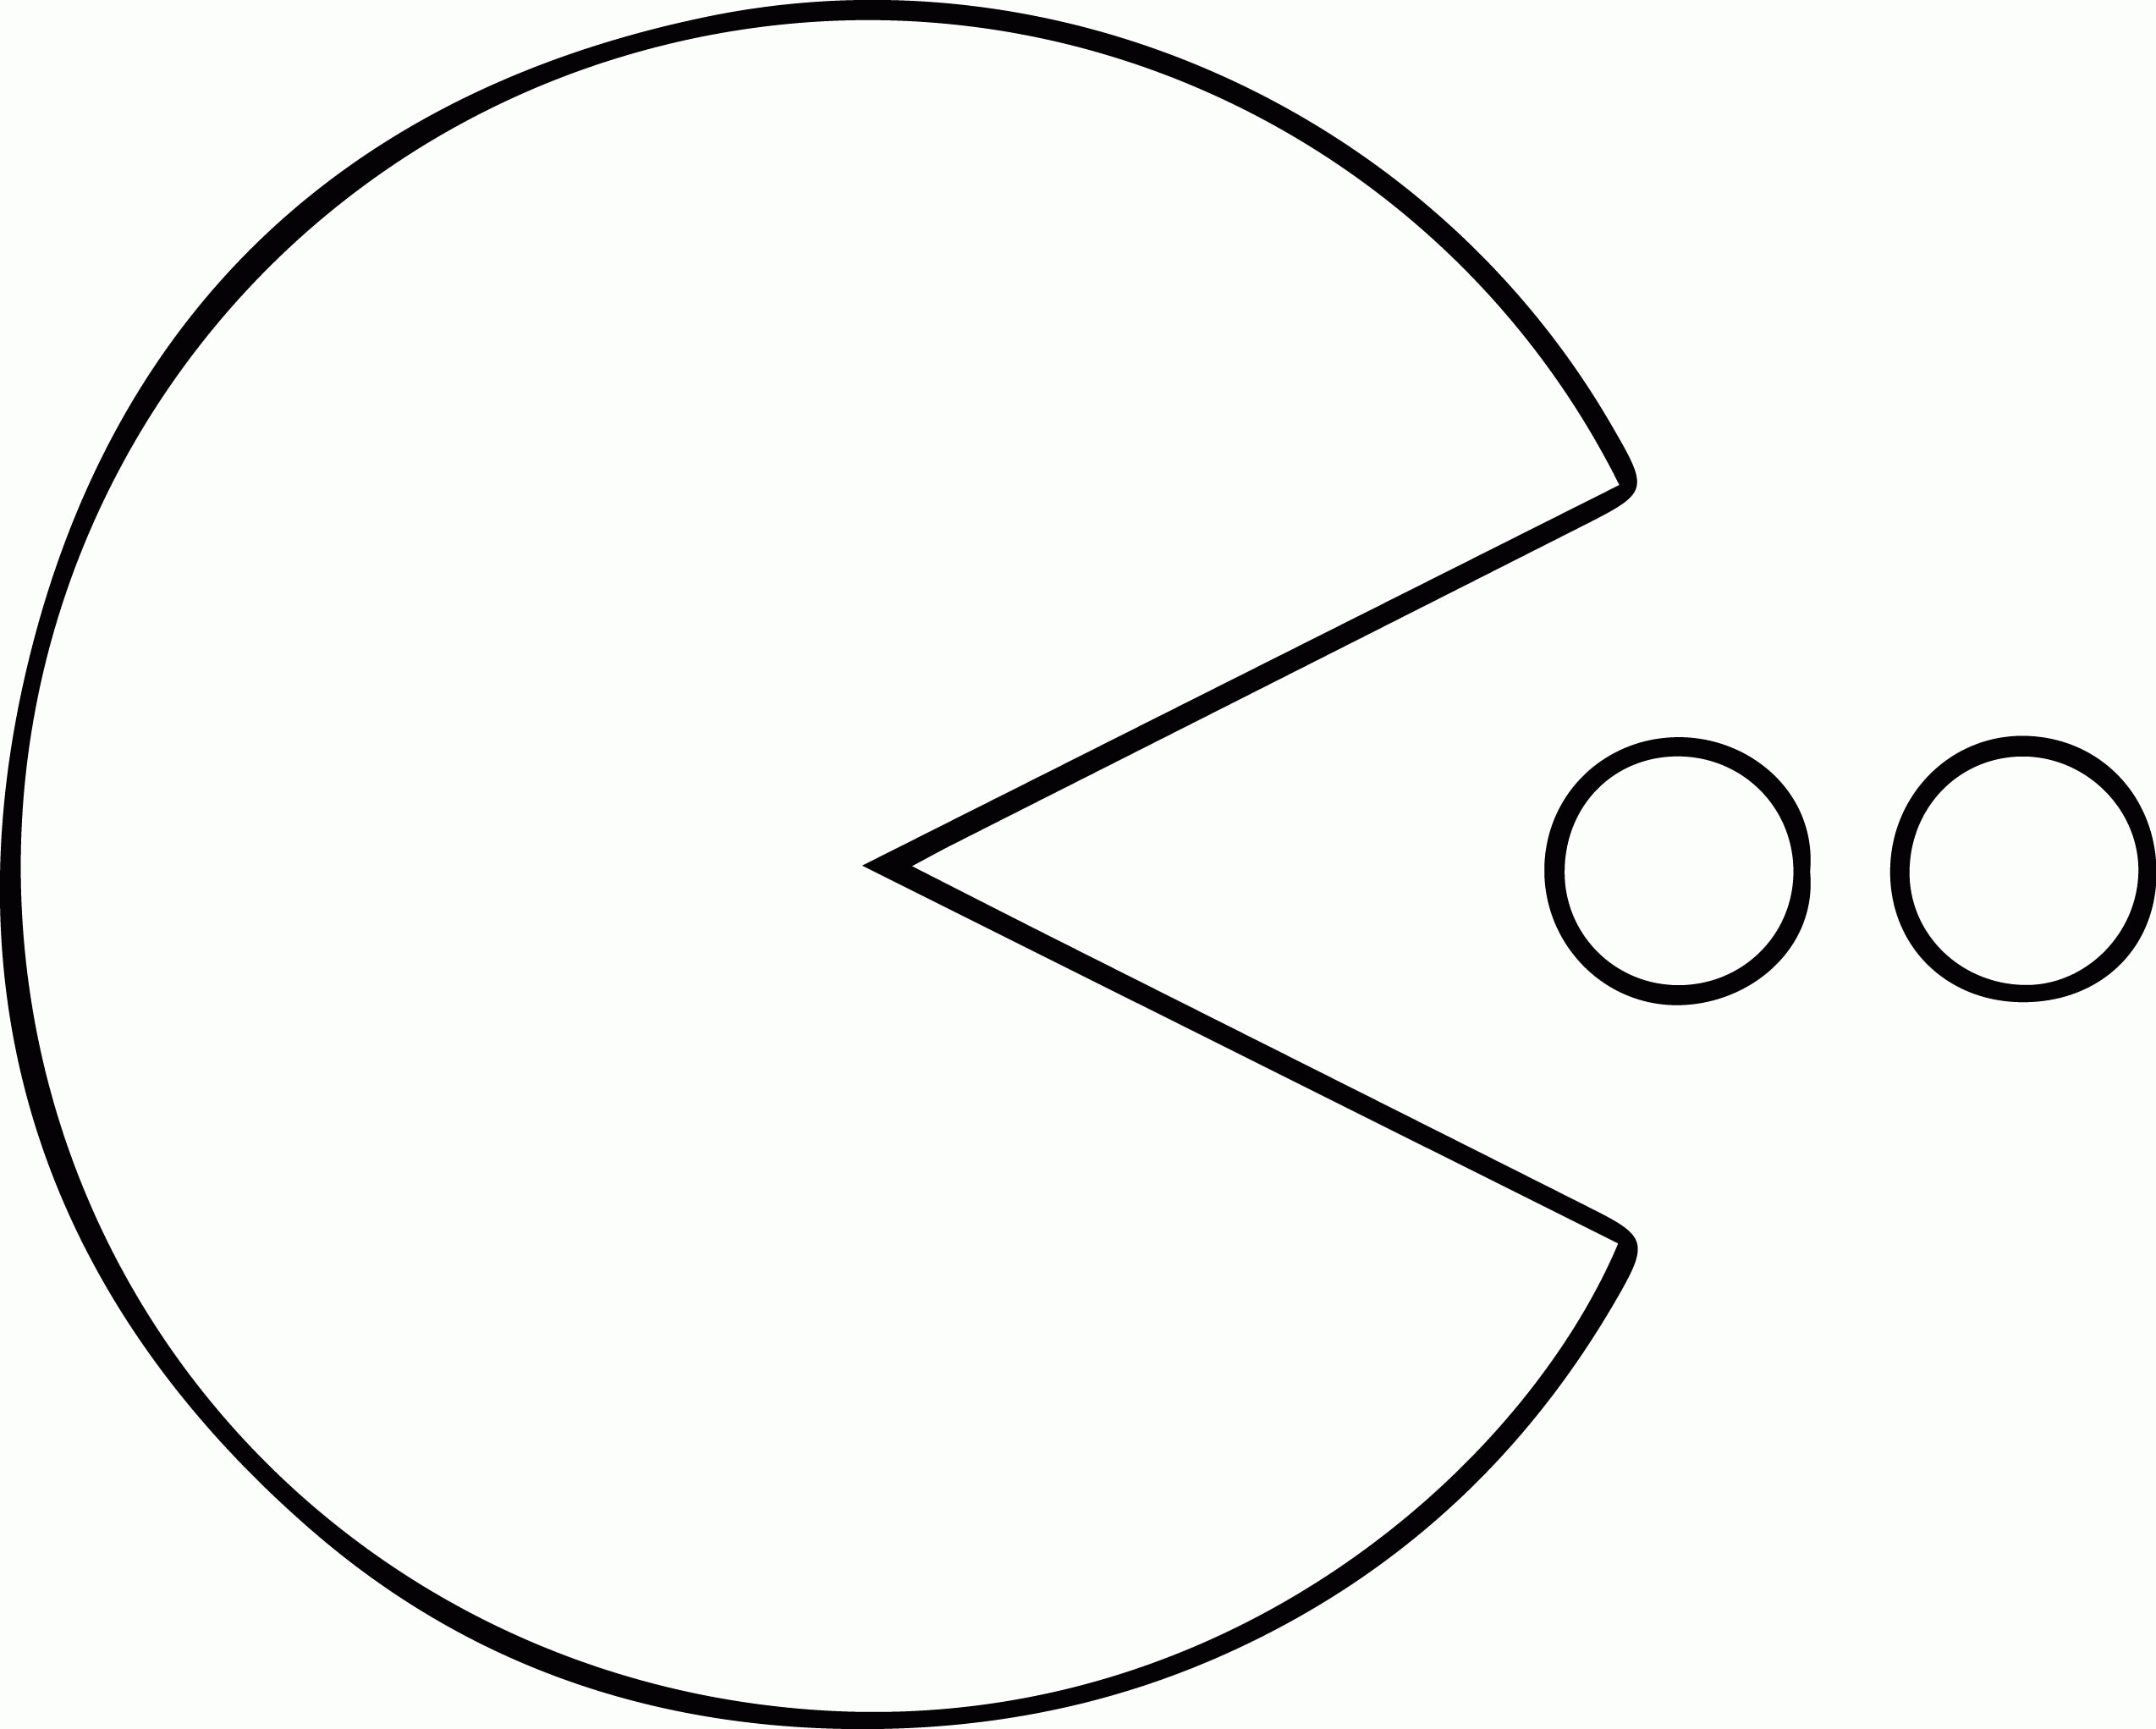 Free Pacman Coloring Pages To Print, Download Free Pacman Coloring